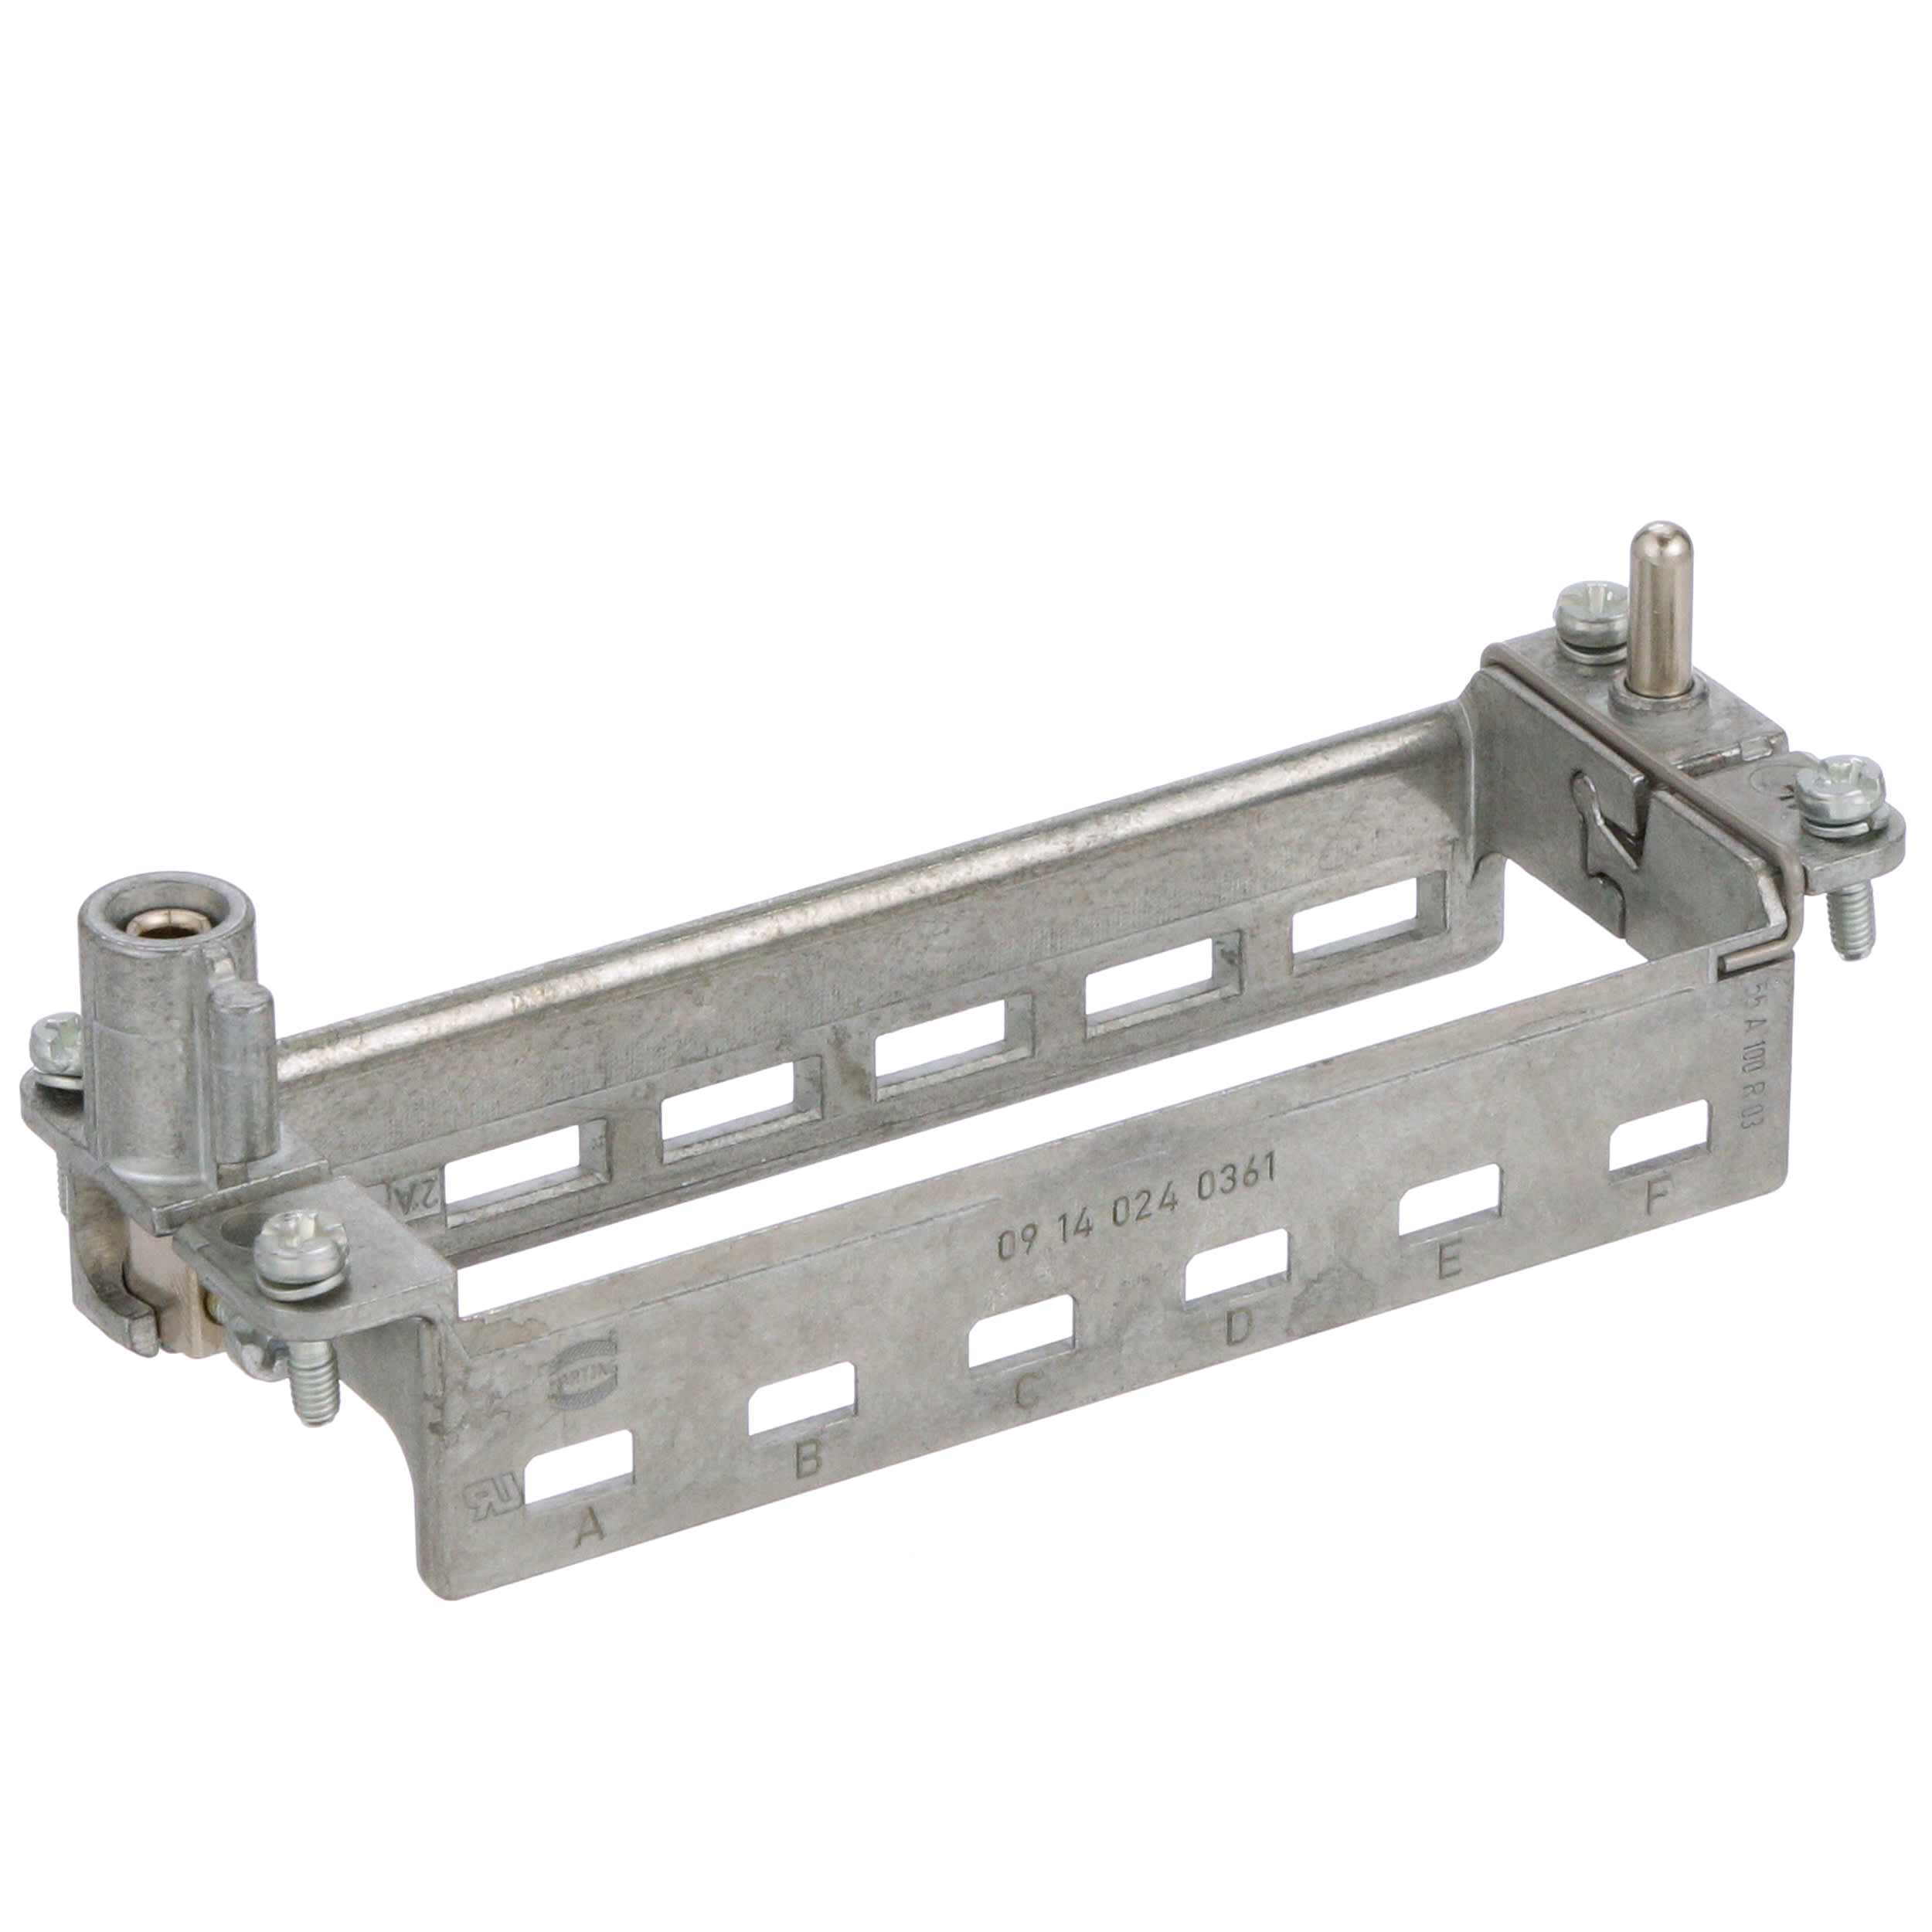 HARTING - 09140240361 - Modular Hinged Frame Plus (spring closing) a#f (for  6 modules) 24B - RS